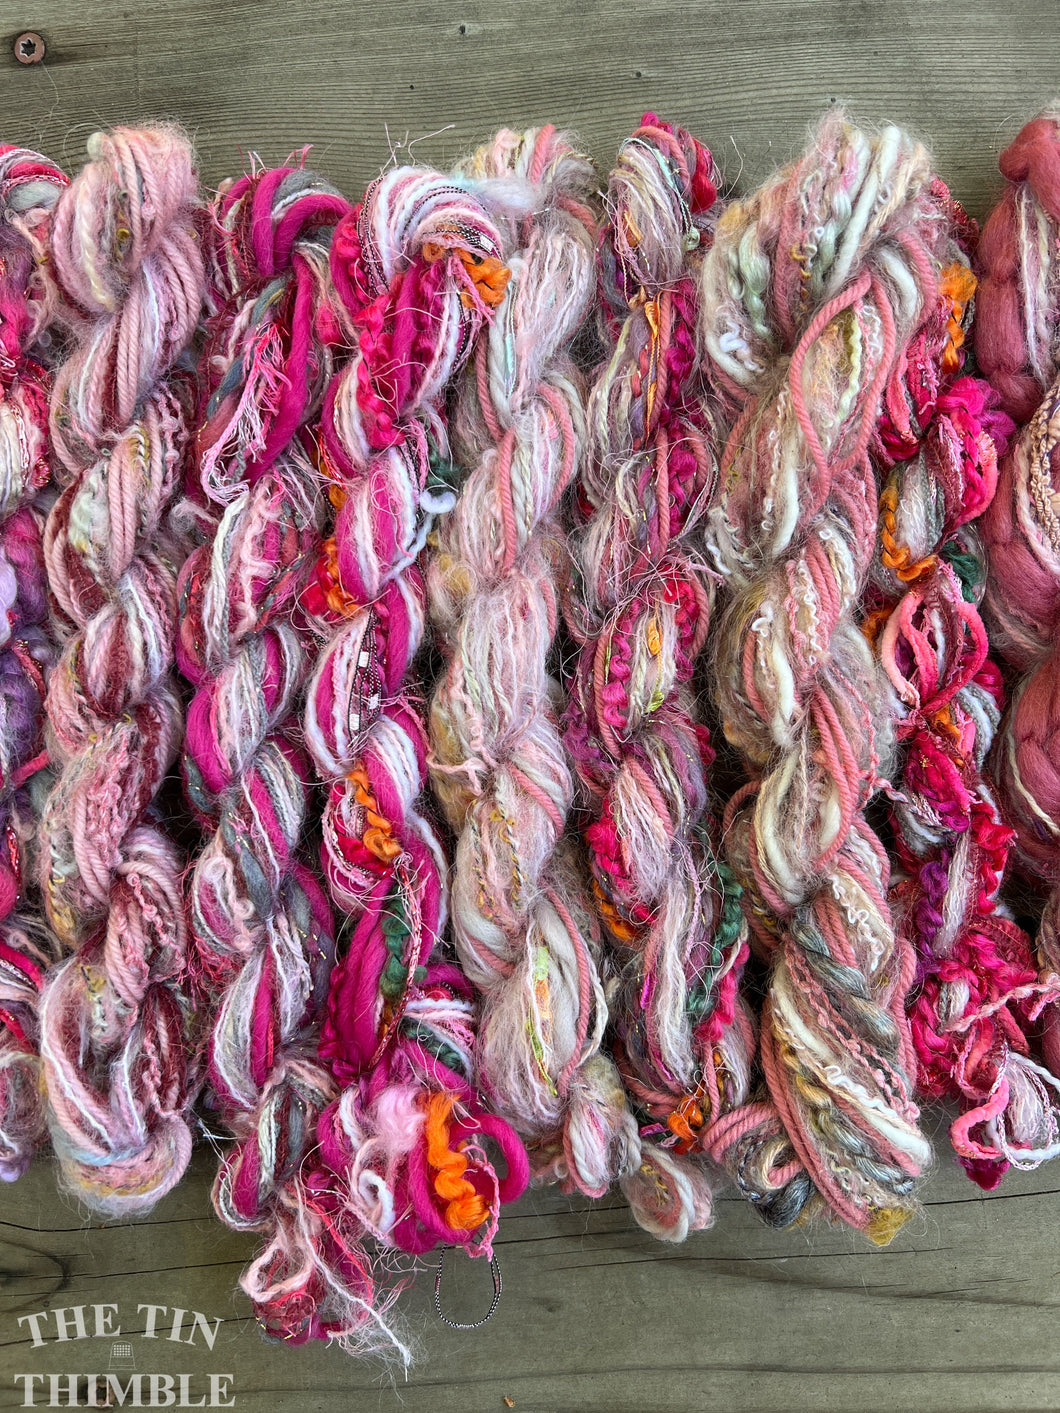 Fiber Frenzy Bundle / Mixed Bundle of Yarn in Pink / Great for Felting / Approximately 24 Yards / 8 Strands Each 3 Yards Long